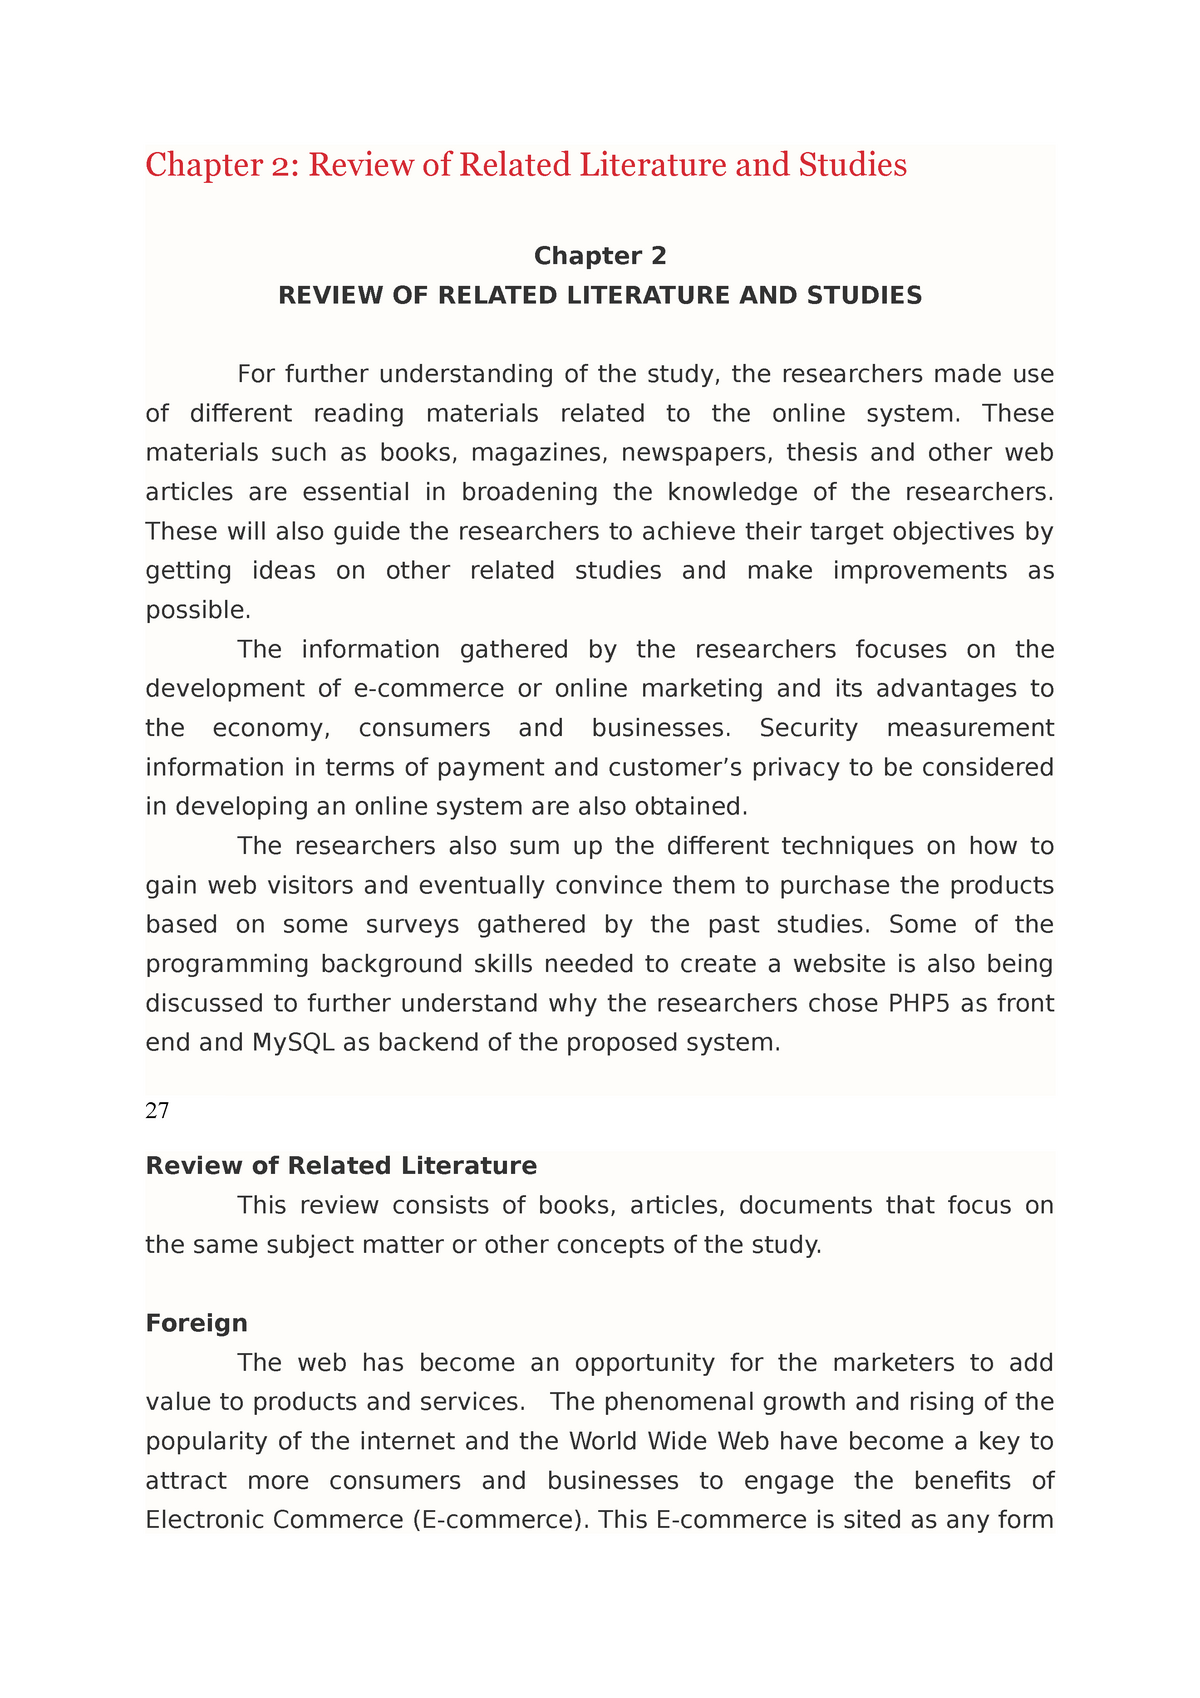 review of related literature and studies activity sheet